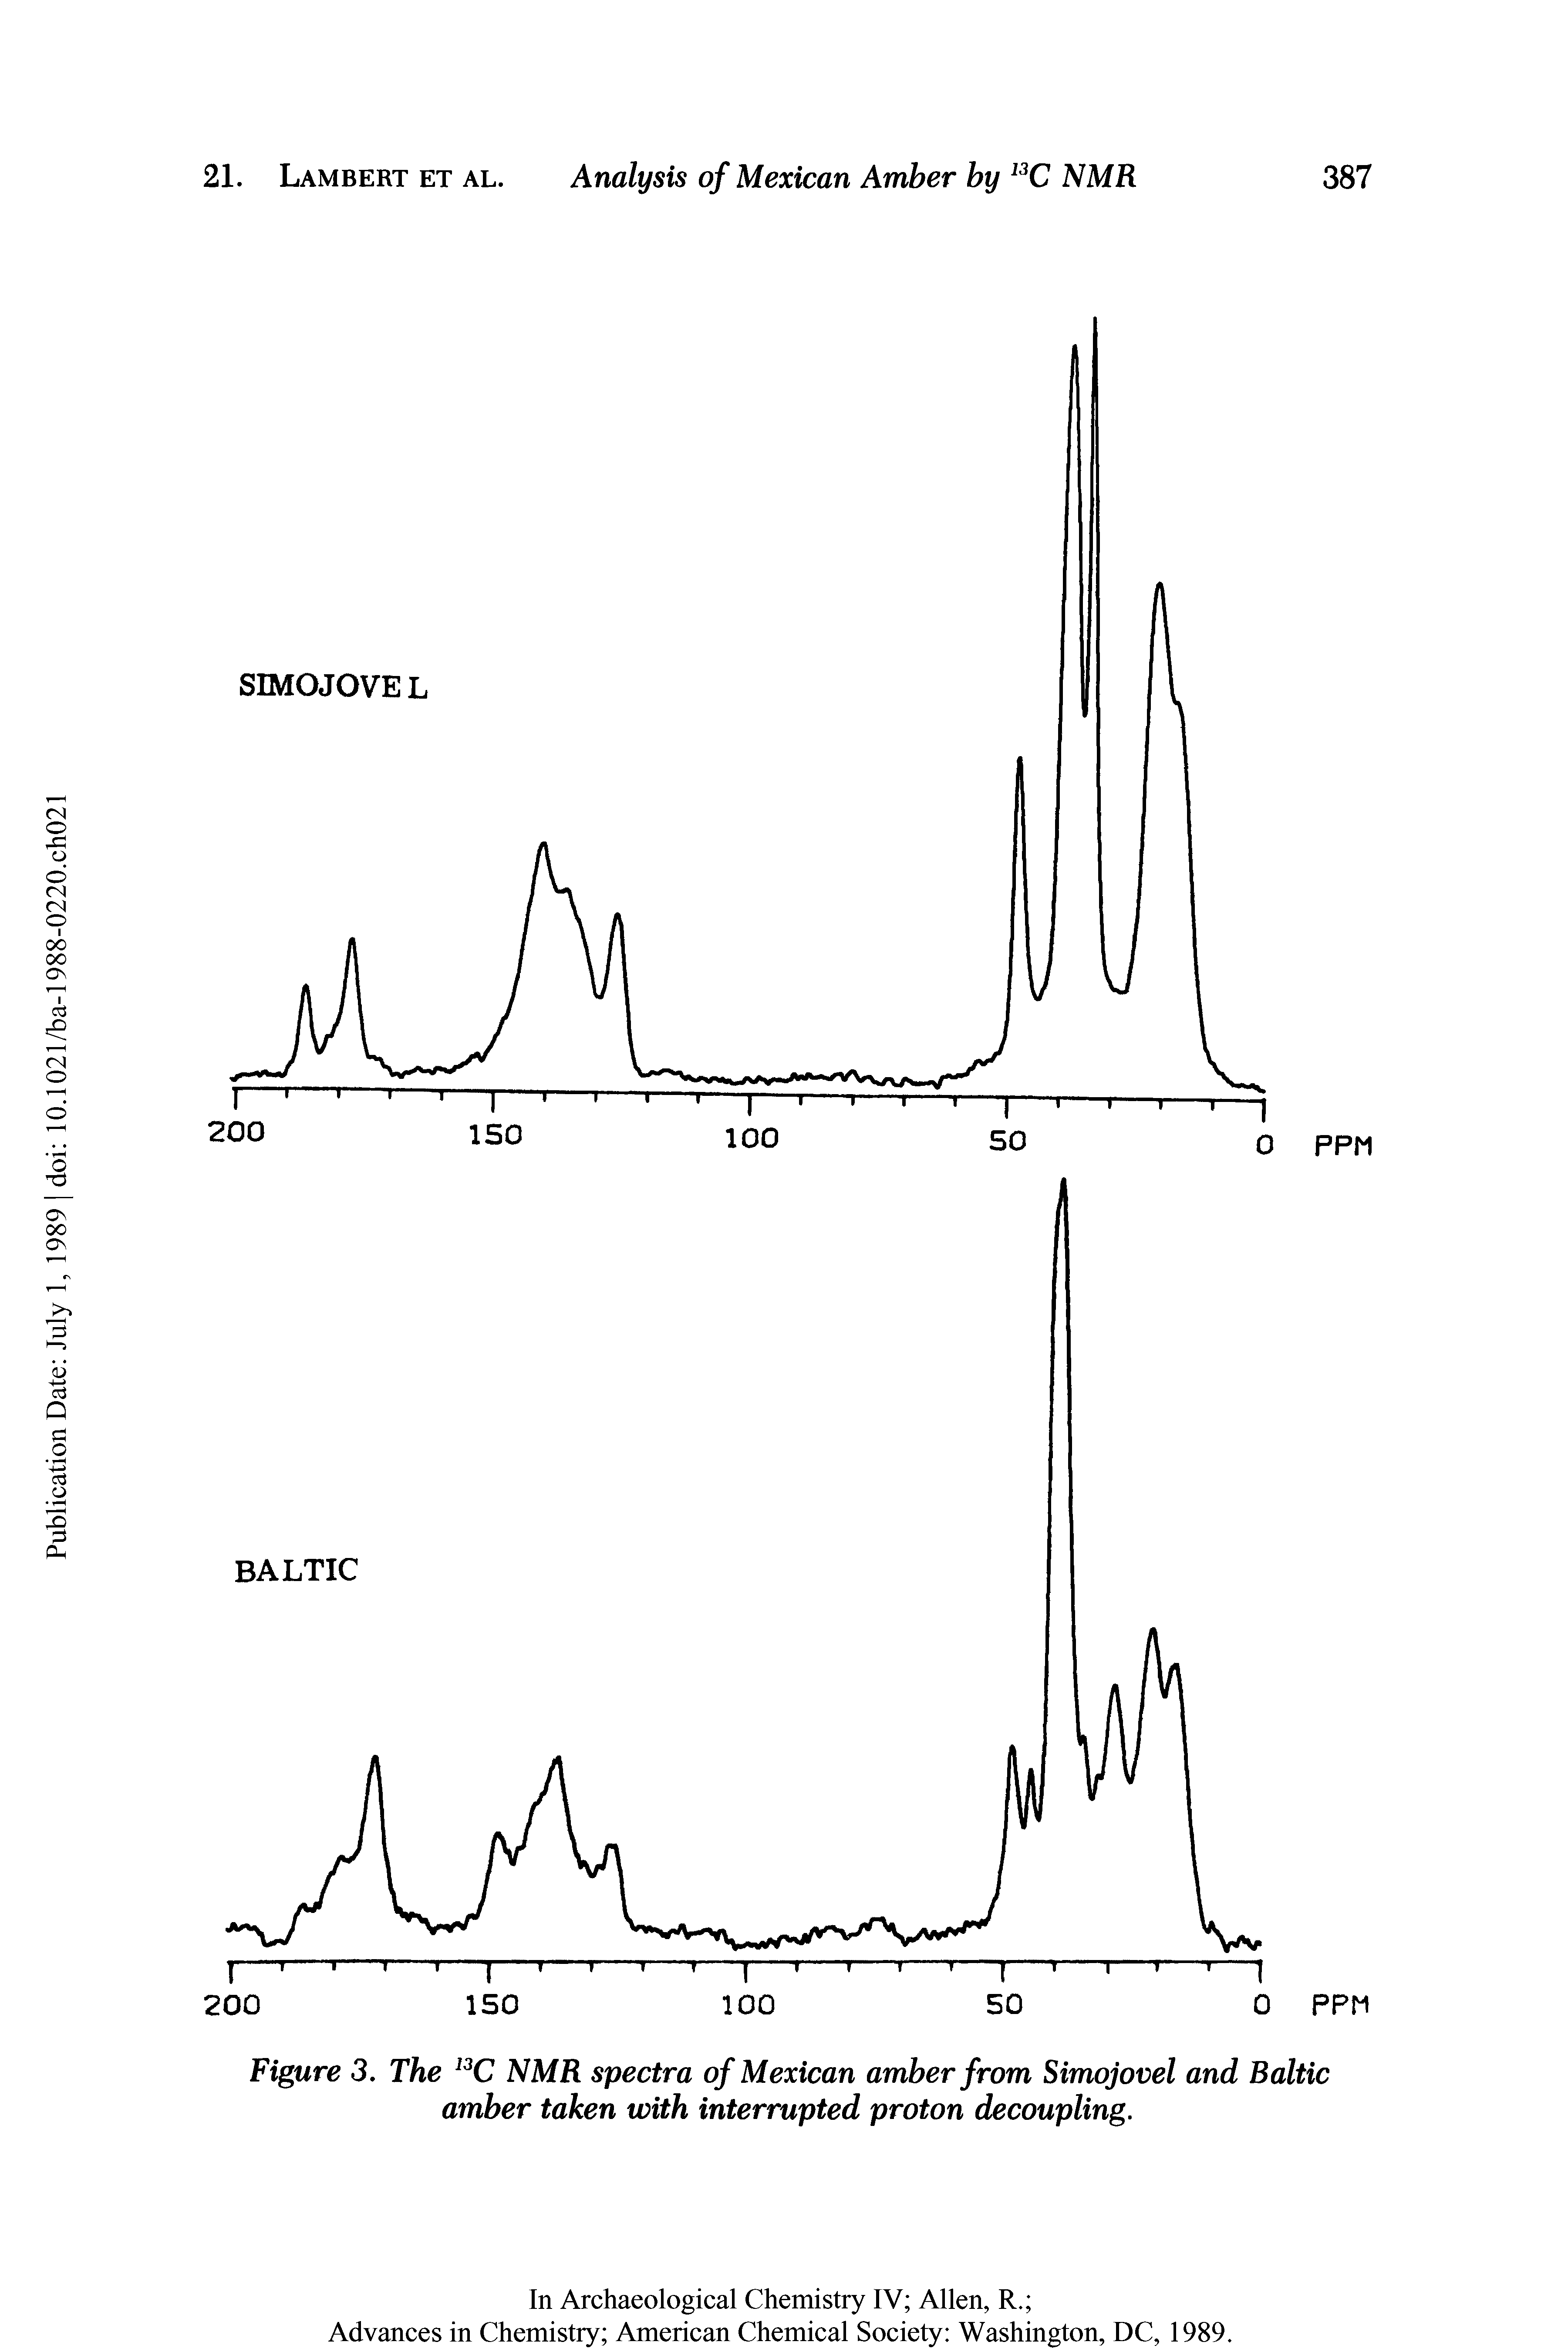 Figure 3. The 13C NMR spectra of Mexican amber from Simojovel and Baltic amber taken with interrupted proton decoupling.